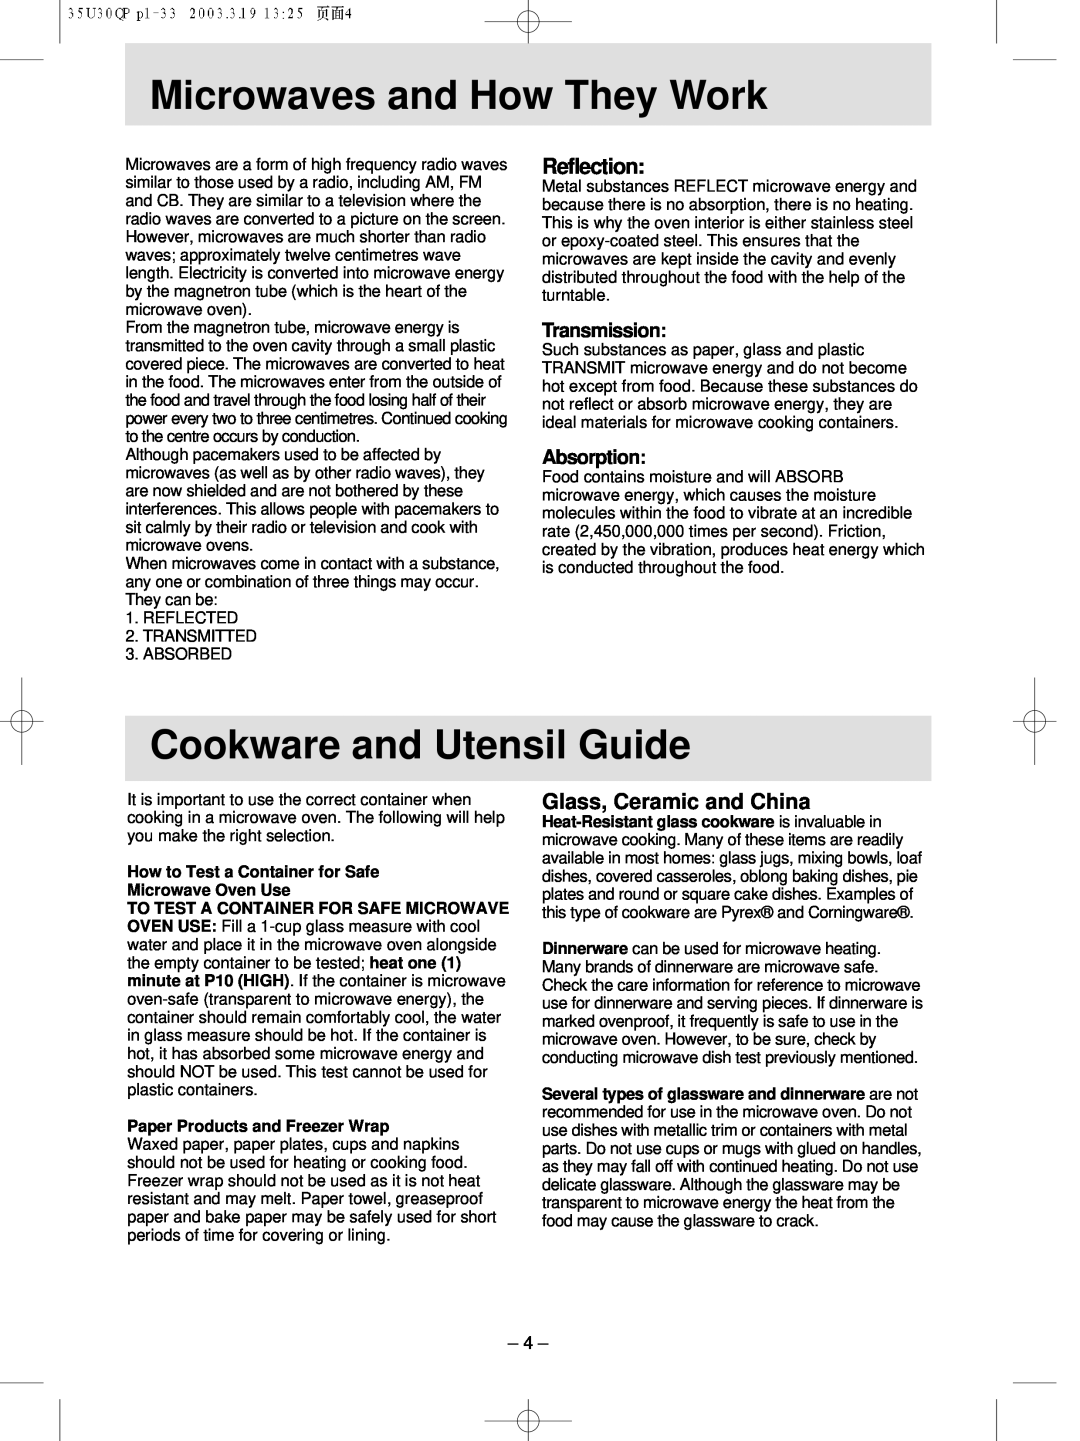 Panasonic NN-MX21 manual Microwaves and How They Work, Cookware and Utensil Guide, Reflection, Glass, Ceramic and China 